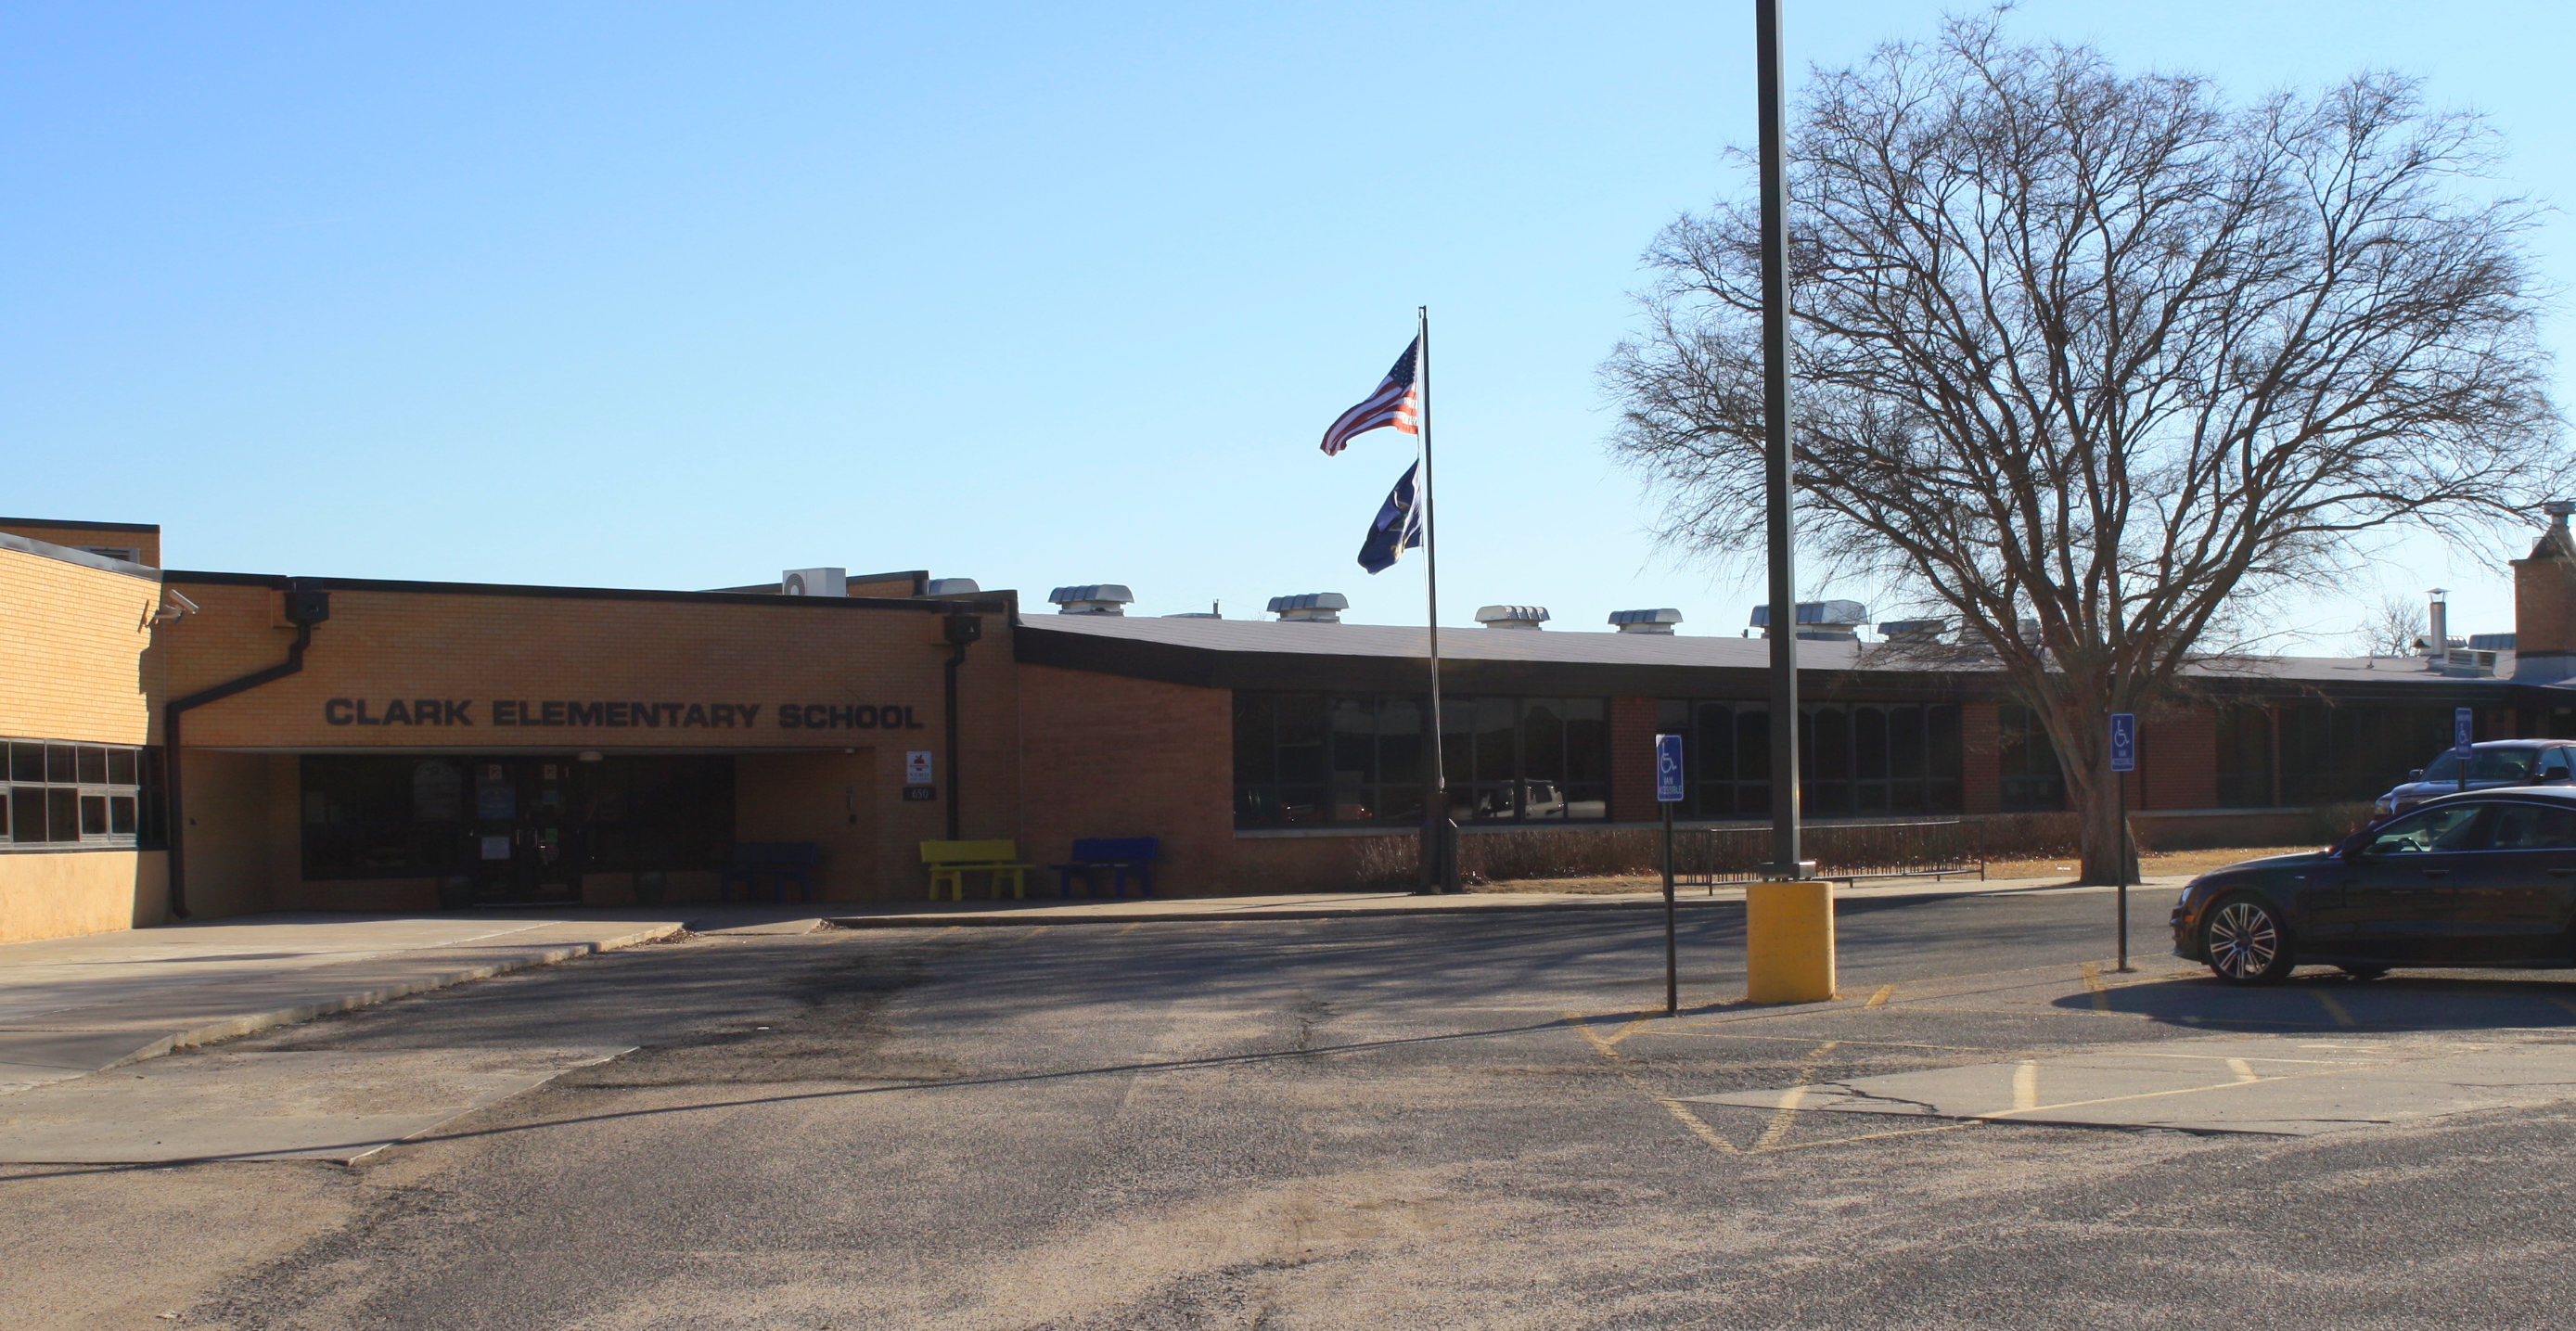 Image of the front of Clark Elementary School